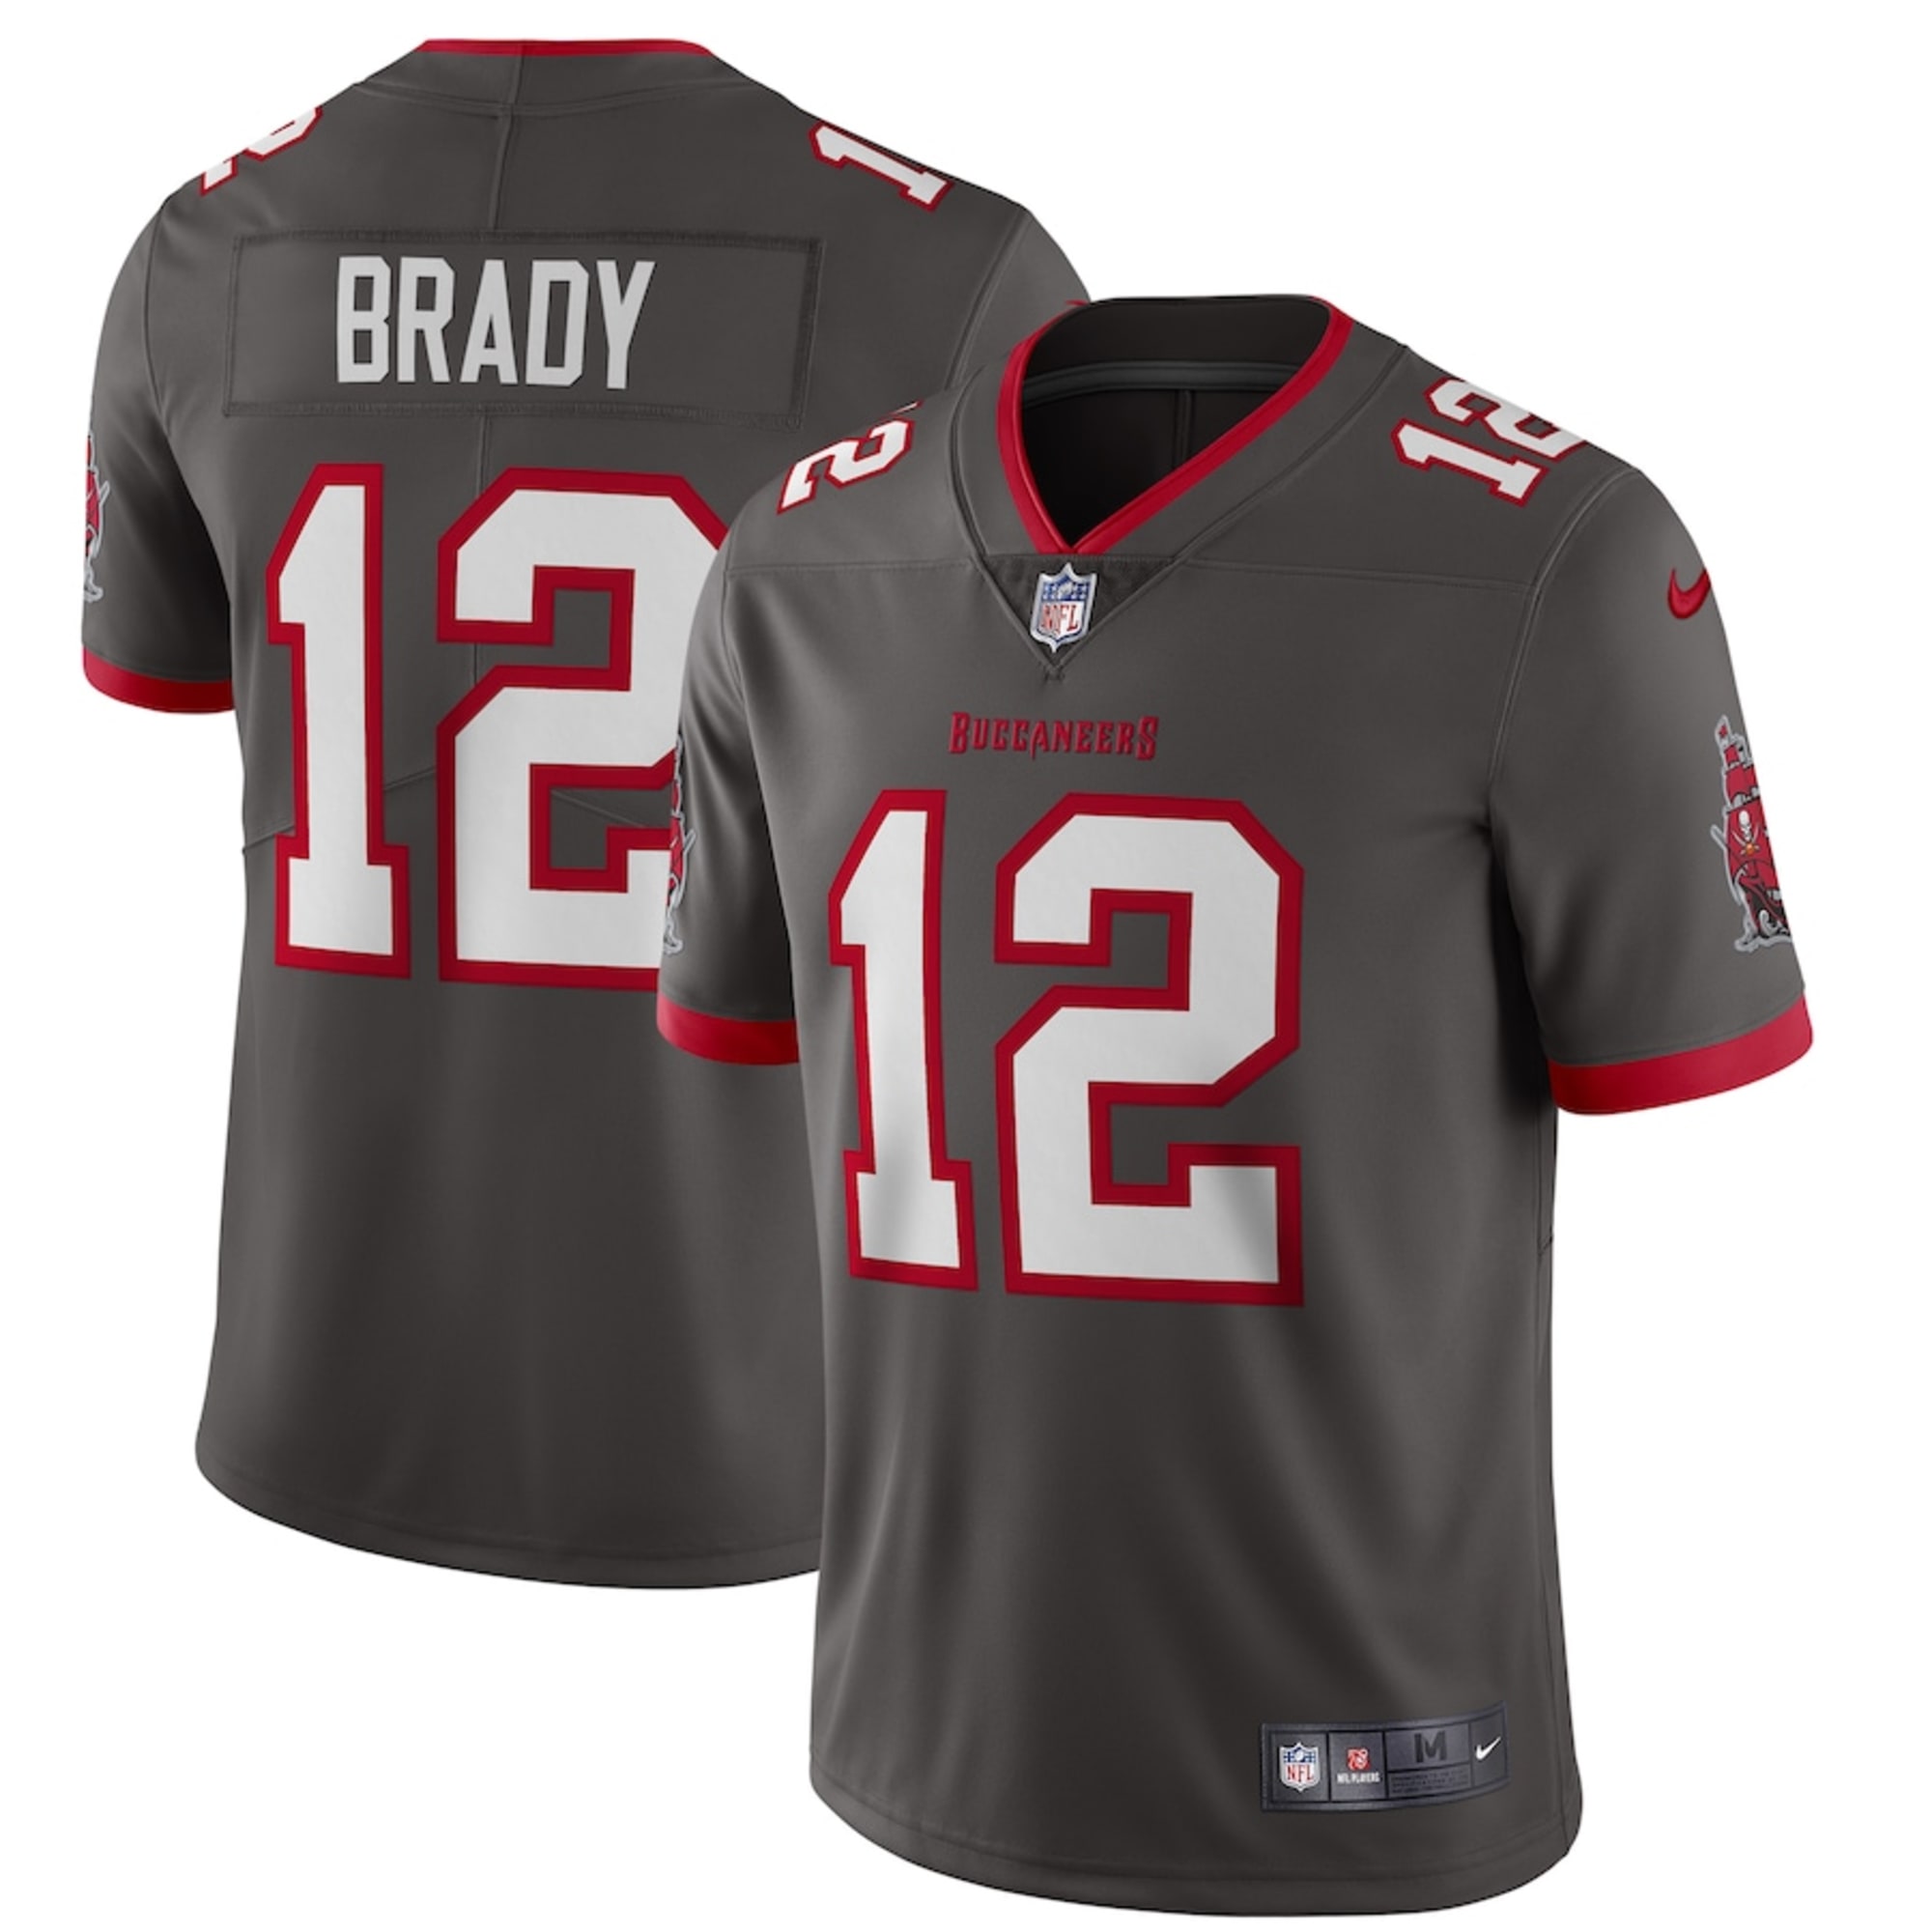 Tampa Bay Buccaneers reveal new jersey 